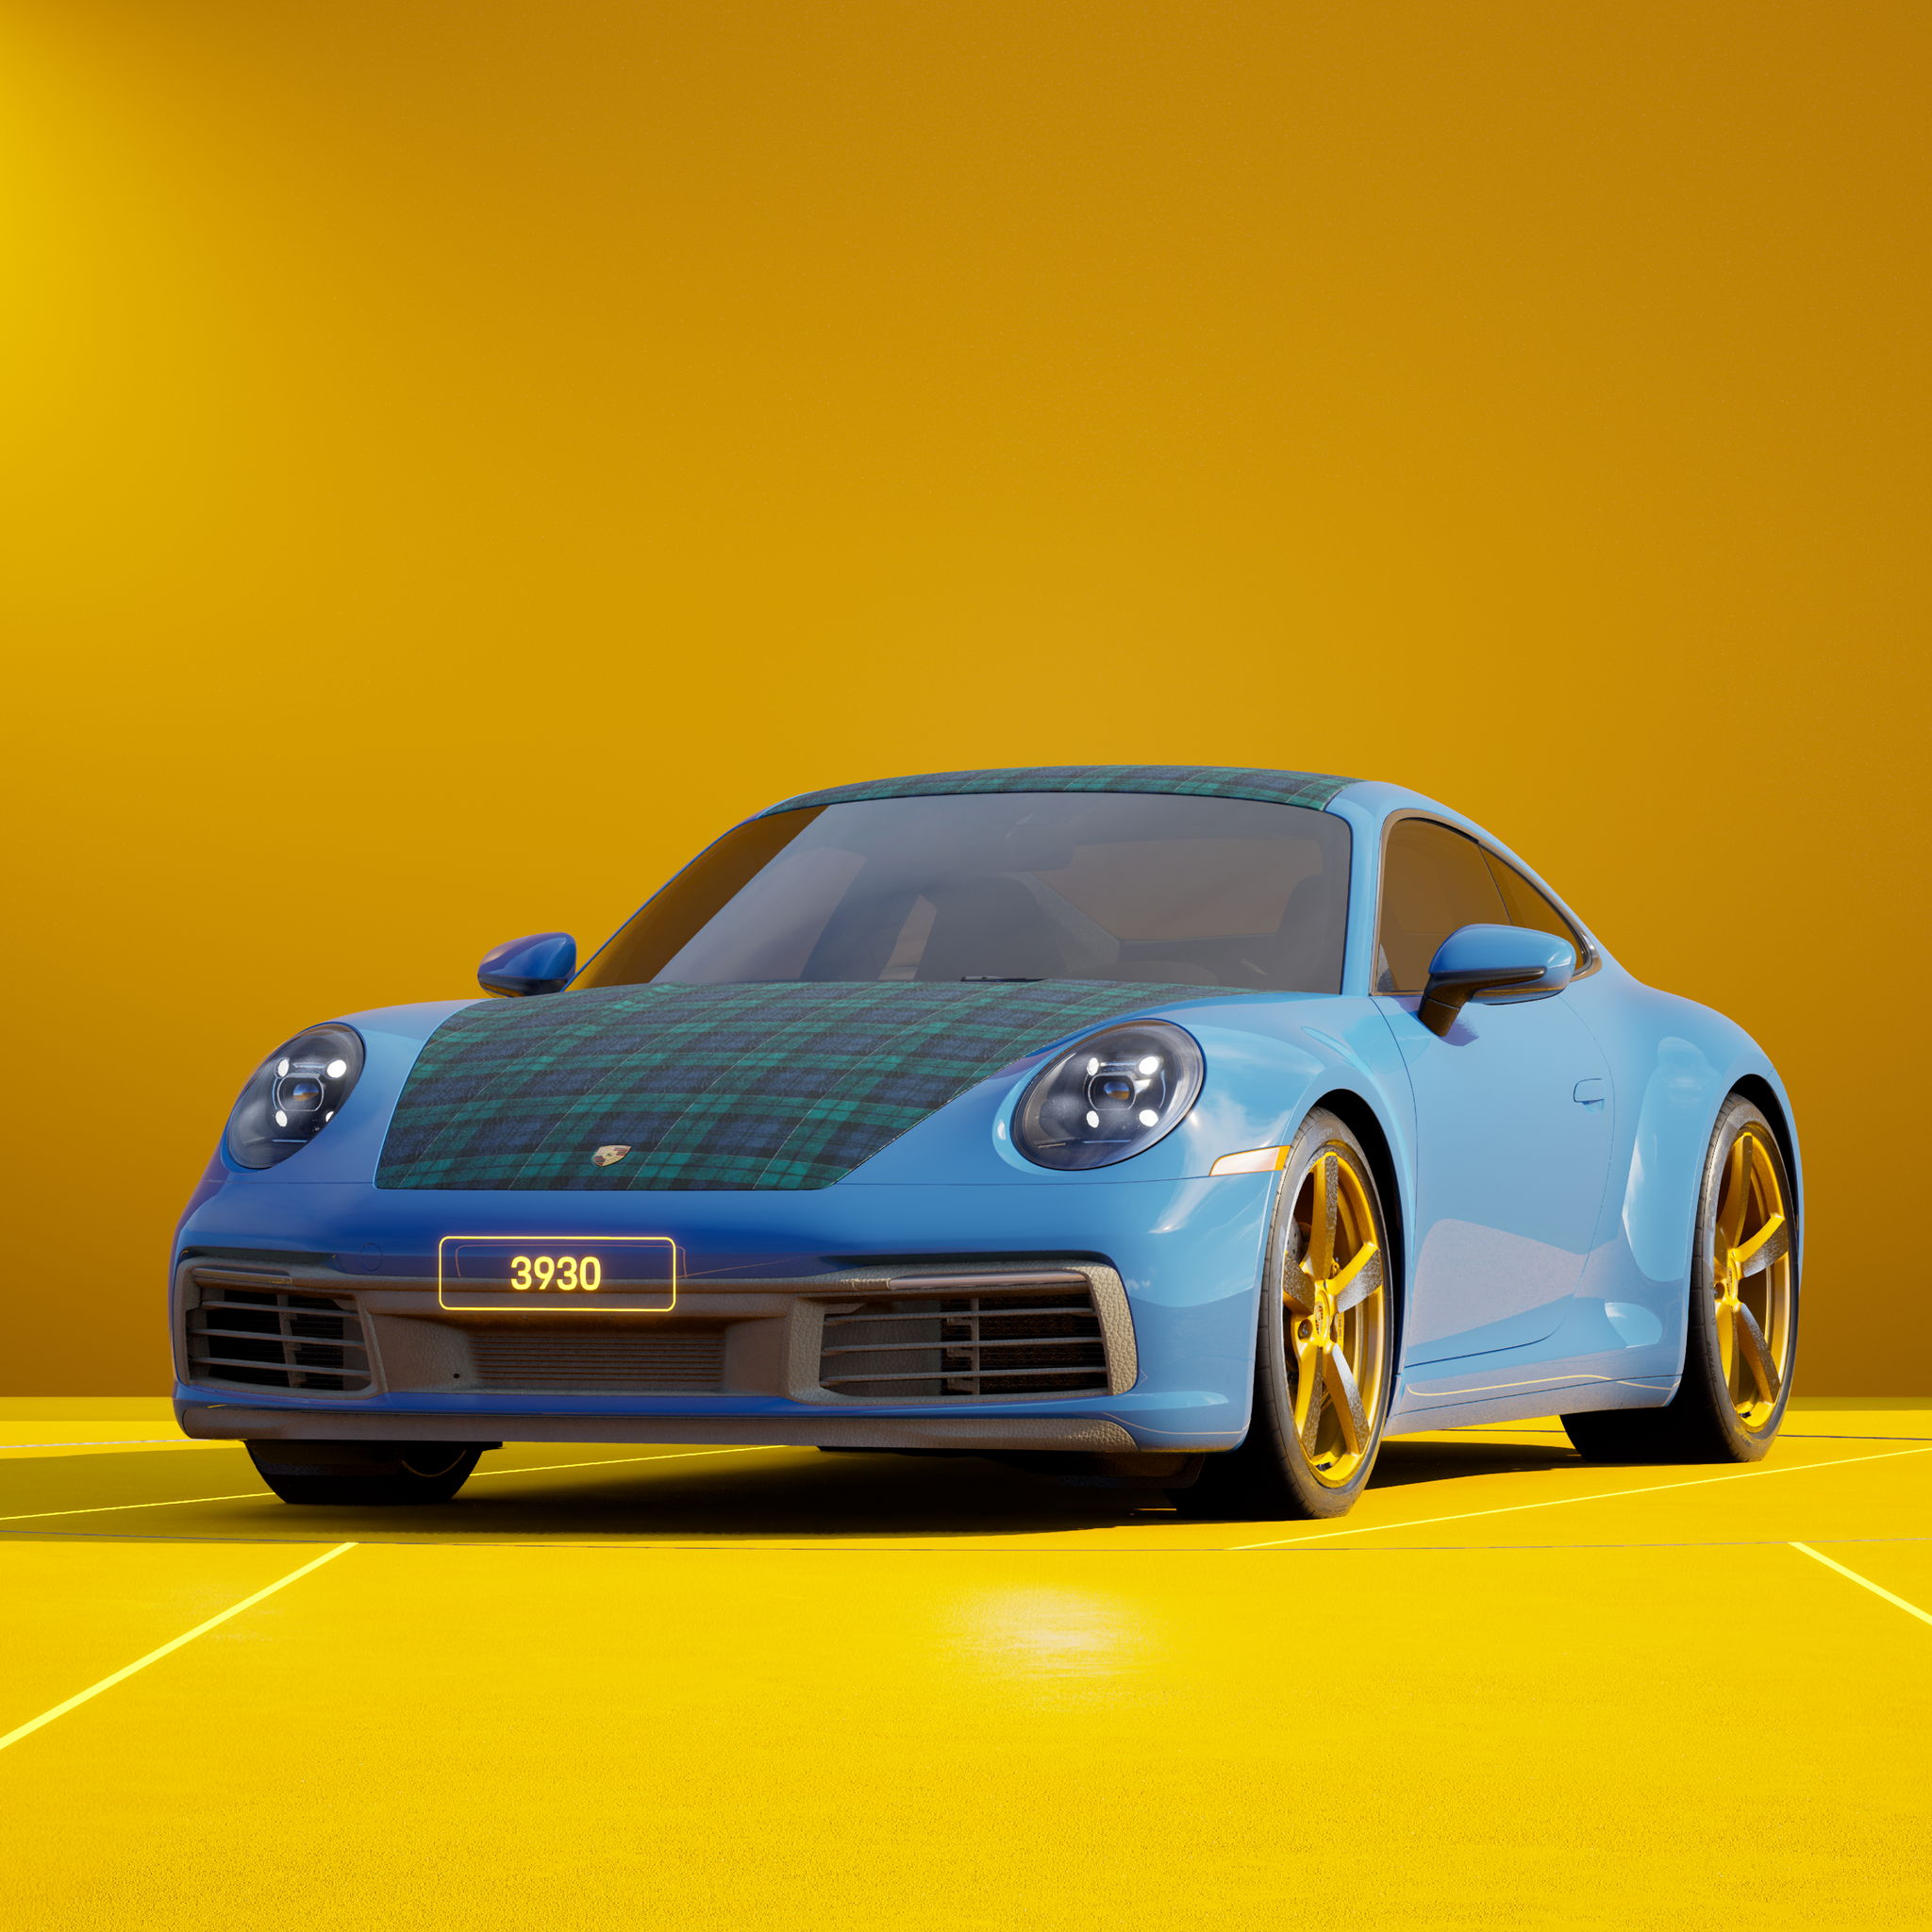 The PORSCHΞ 911 3930 image in phase